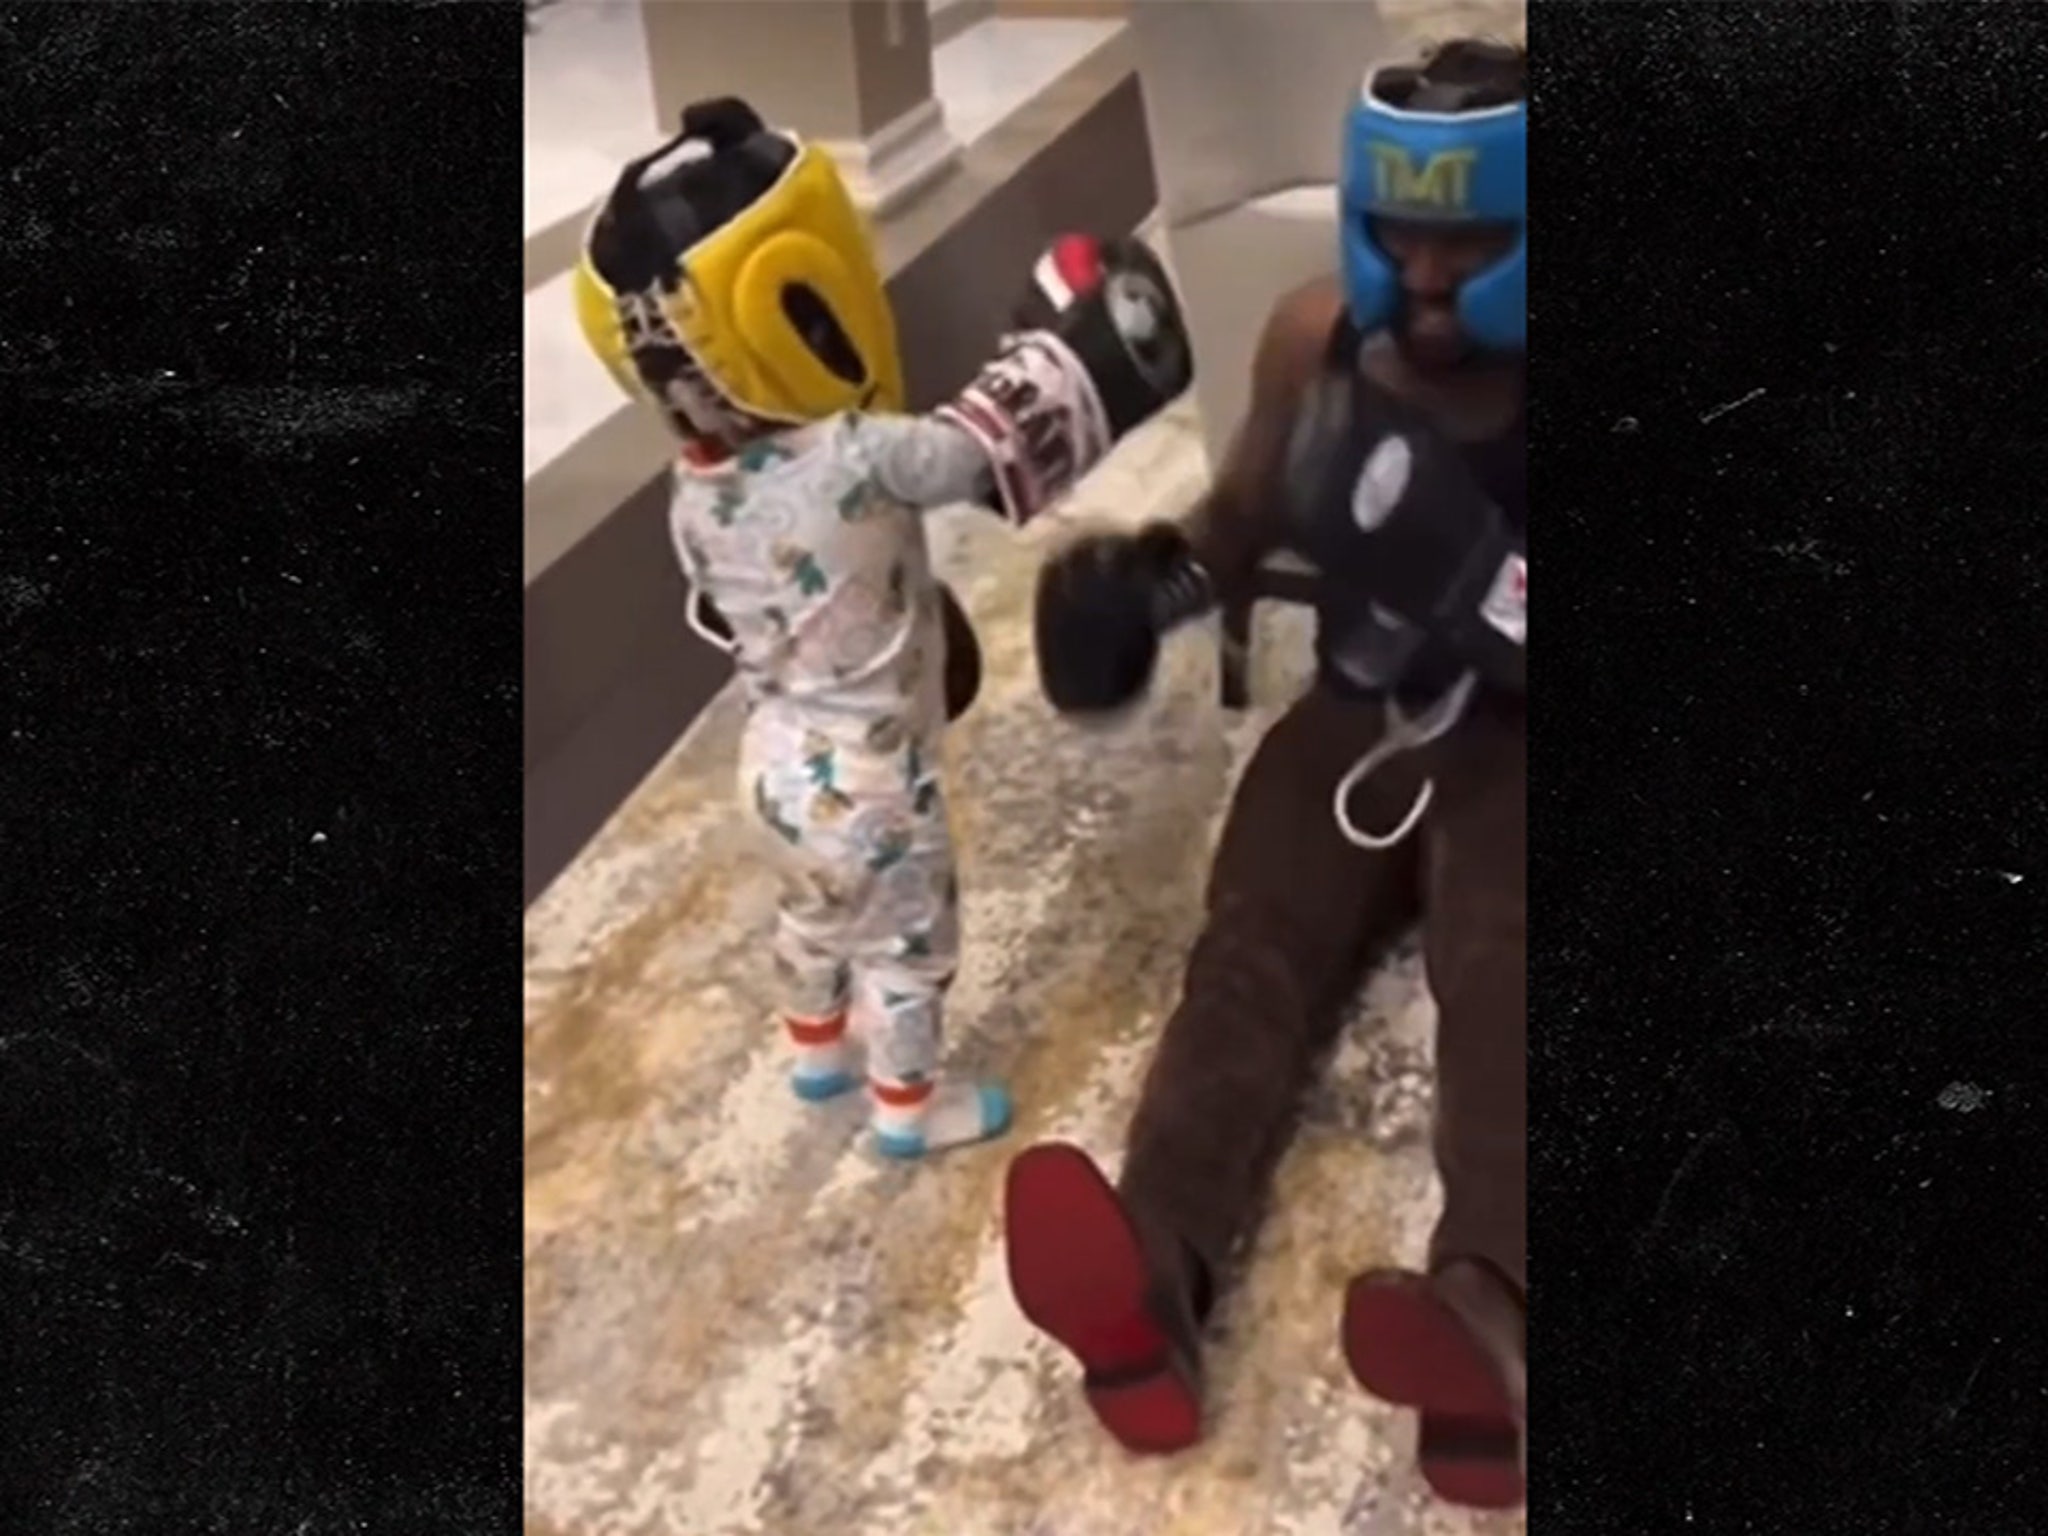 Floyd Mayweather is out shoe shopping with his grandson and NBA